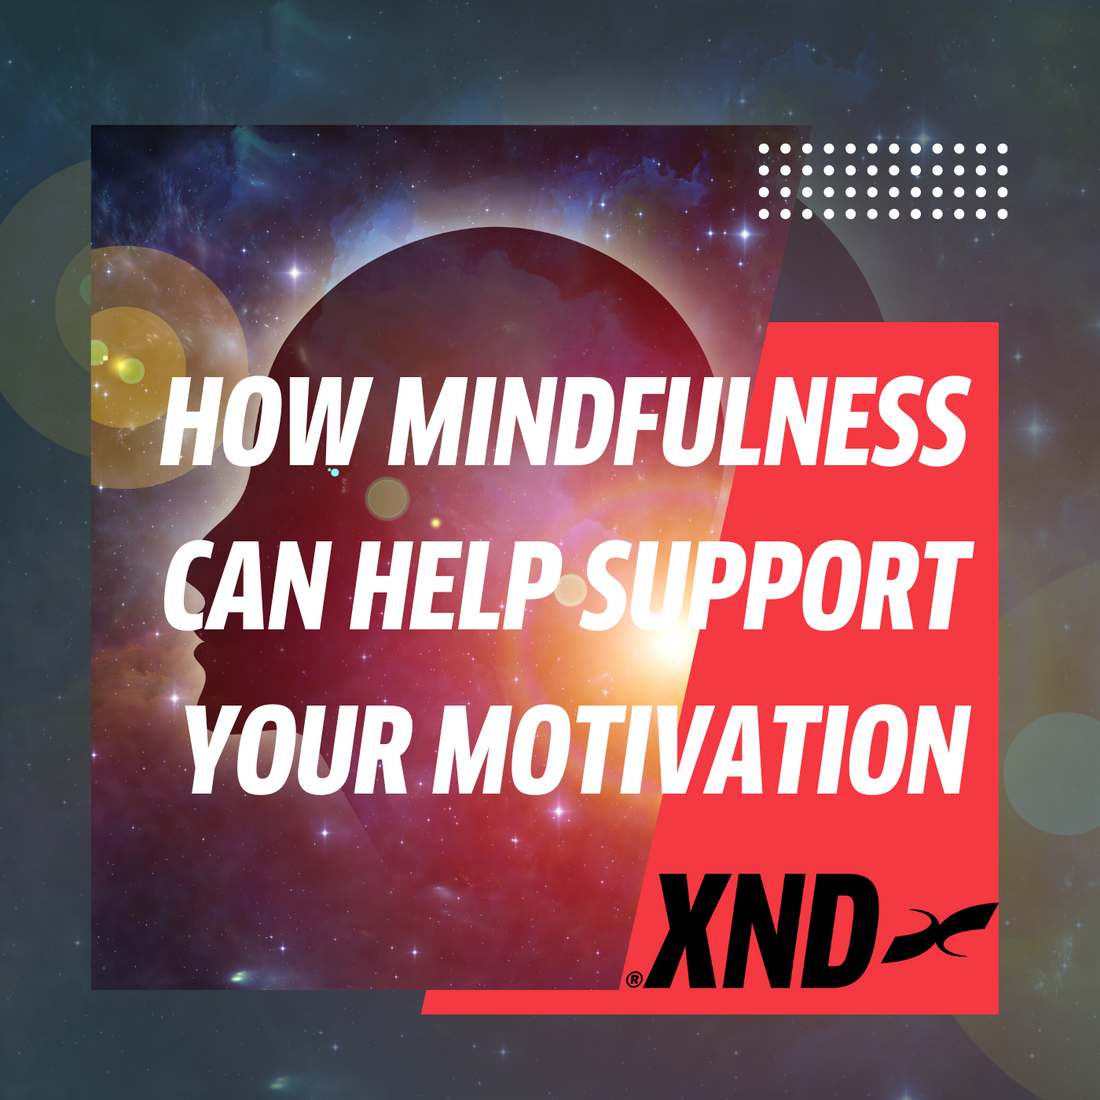 Can mindfulness help with your motivation?